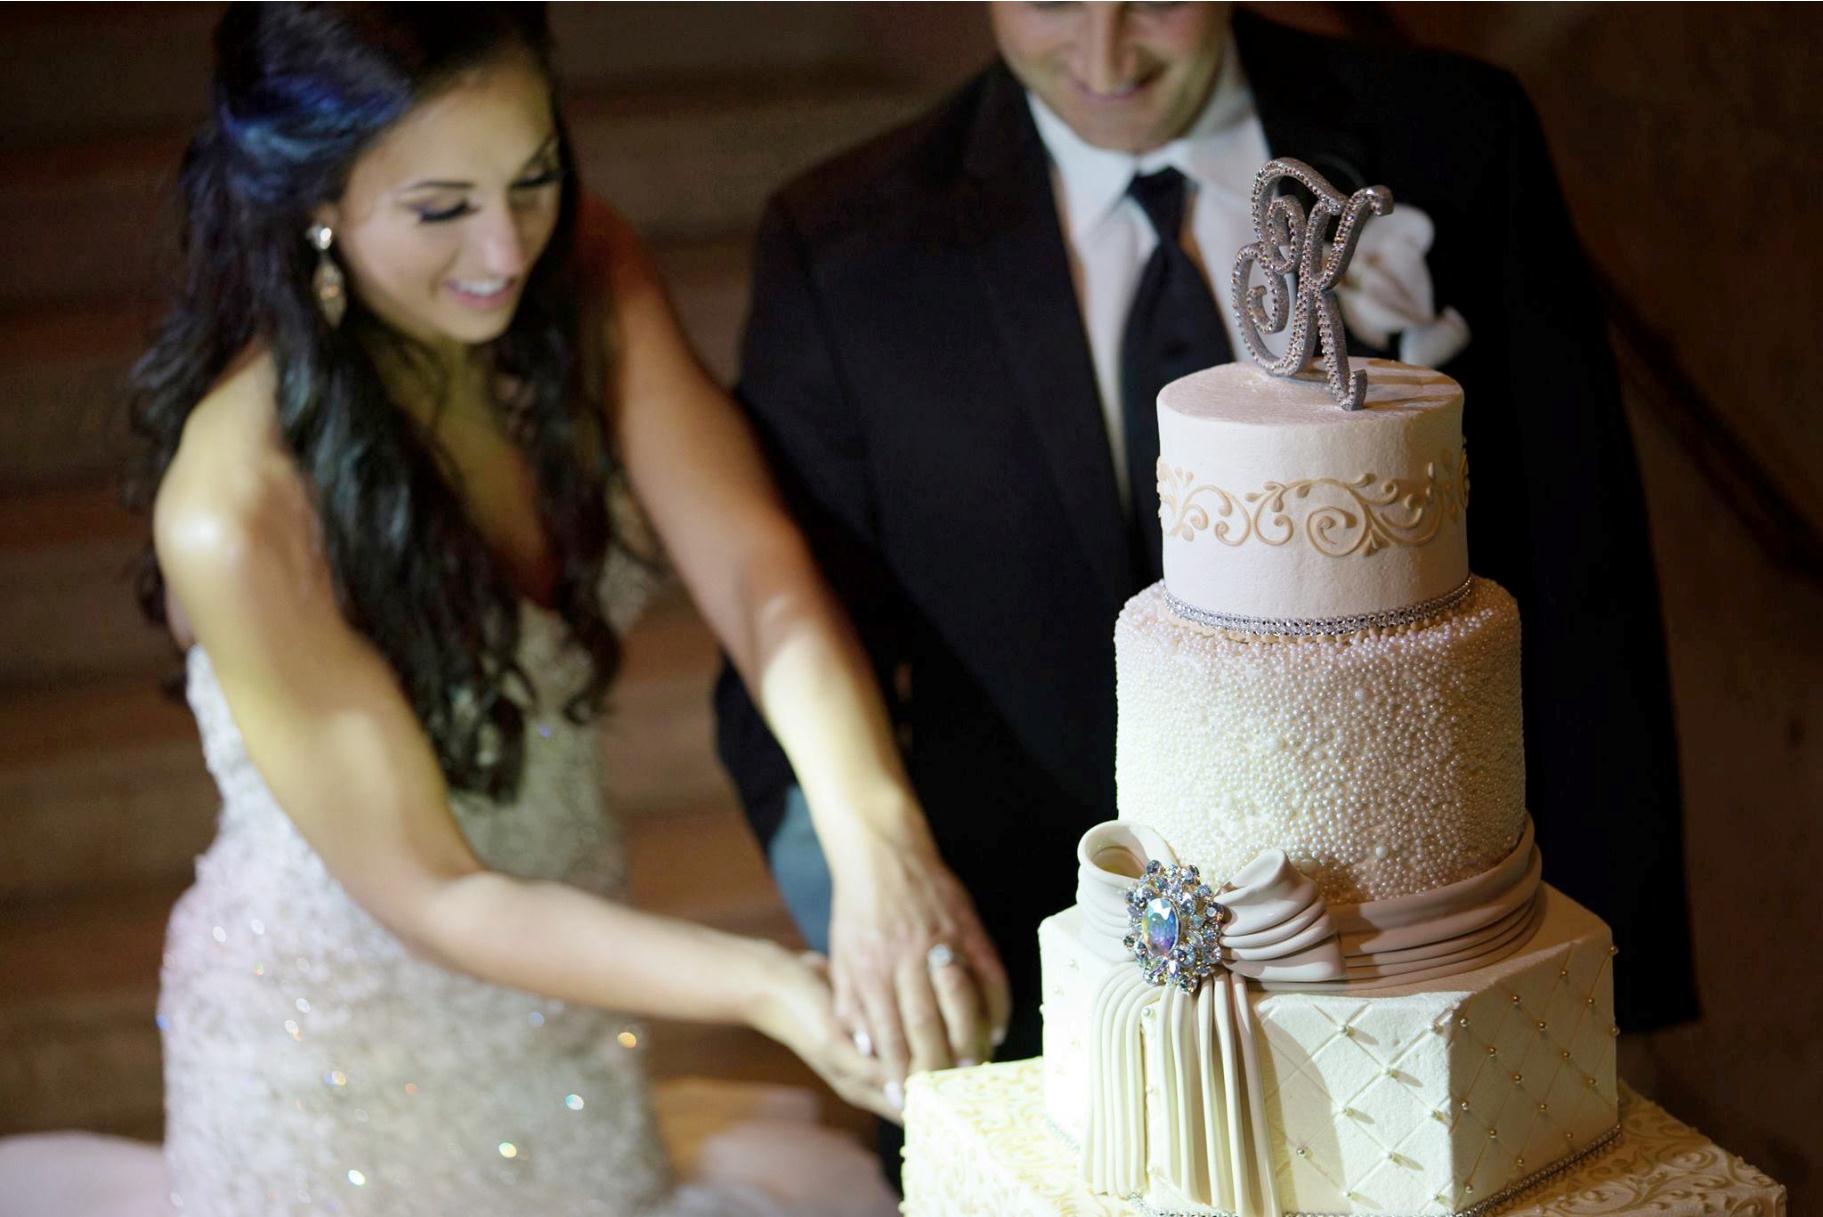 Cakes By Gina  Houston TX on Instagram Deciding between adding your  monogram or your last name This sixtiered wedding cake has two spheres  that give the cake extra texture